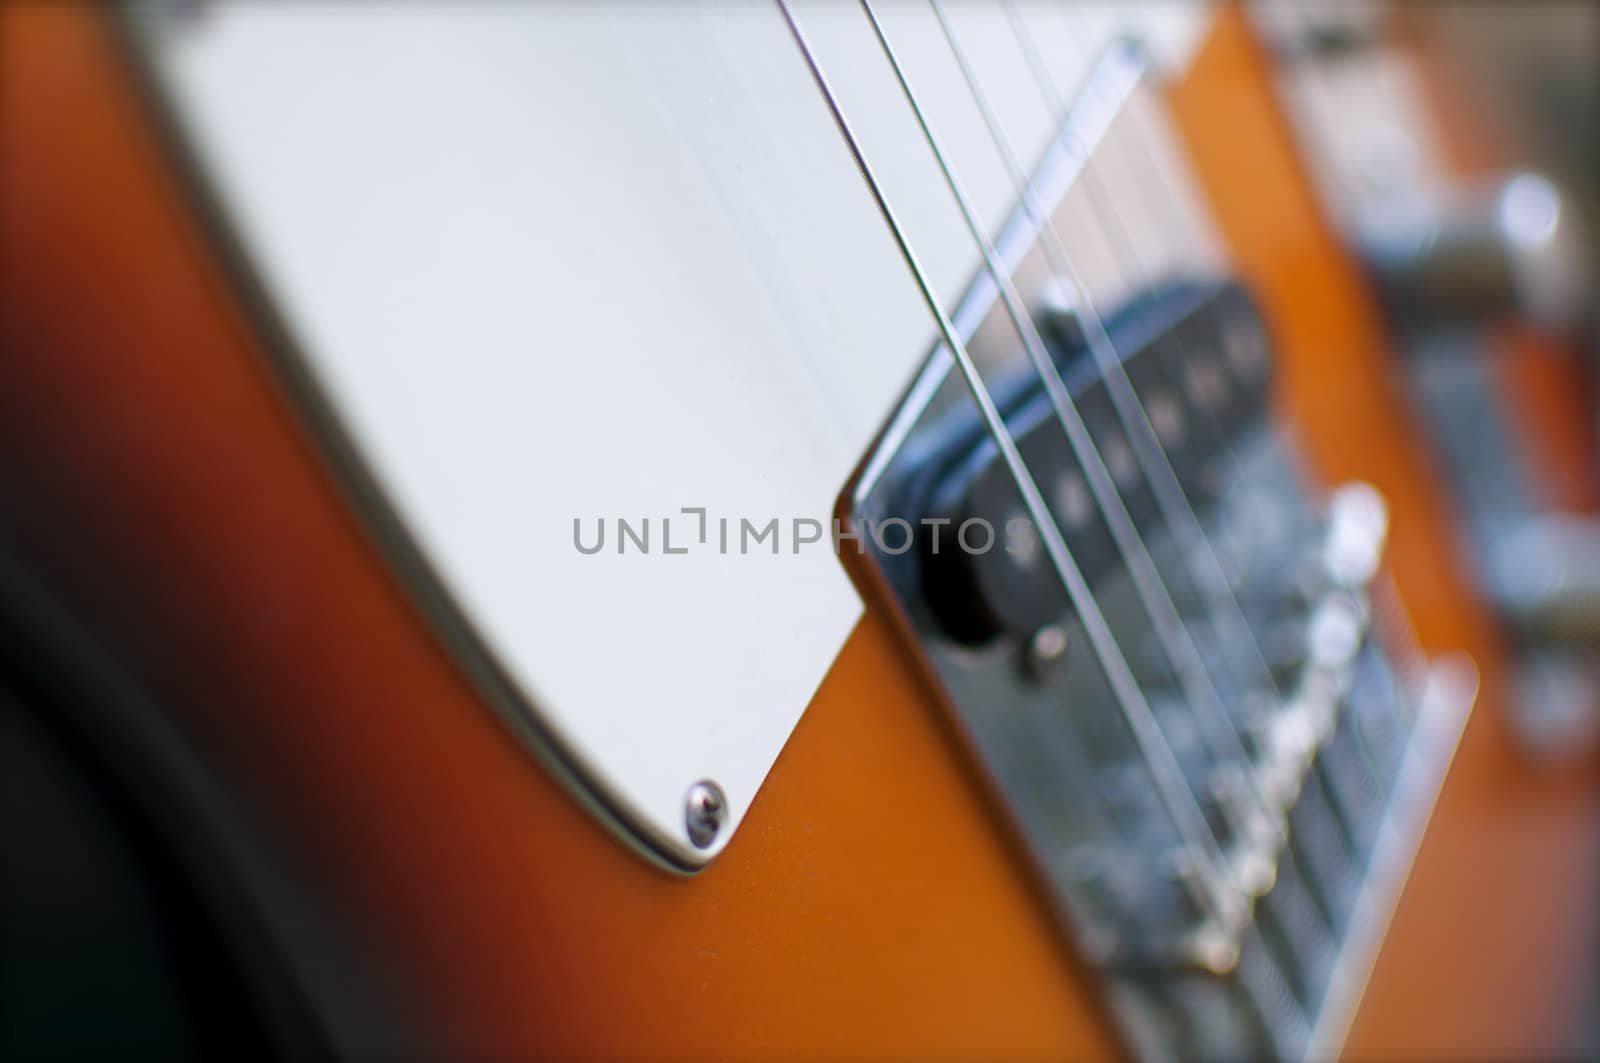 An electric guitar shines in the light of a nearby window.  Shallow depth of field is intentional.